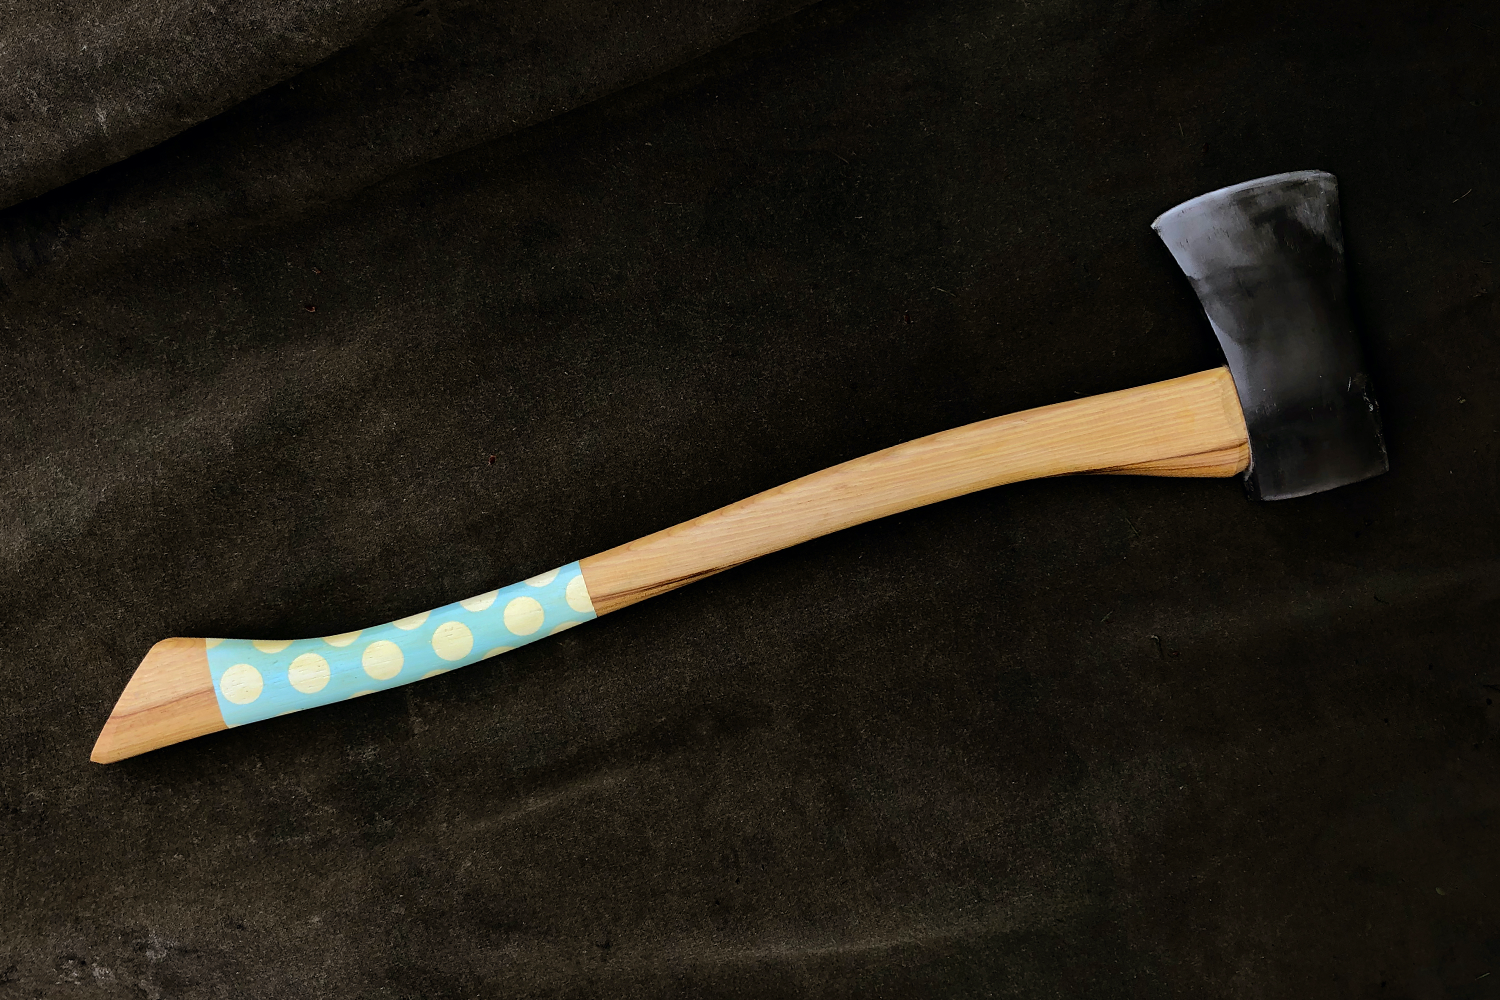 A polka dot axe from Best Made called the Handsome Dan on a black background